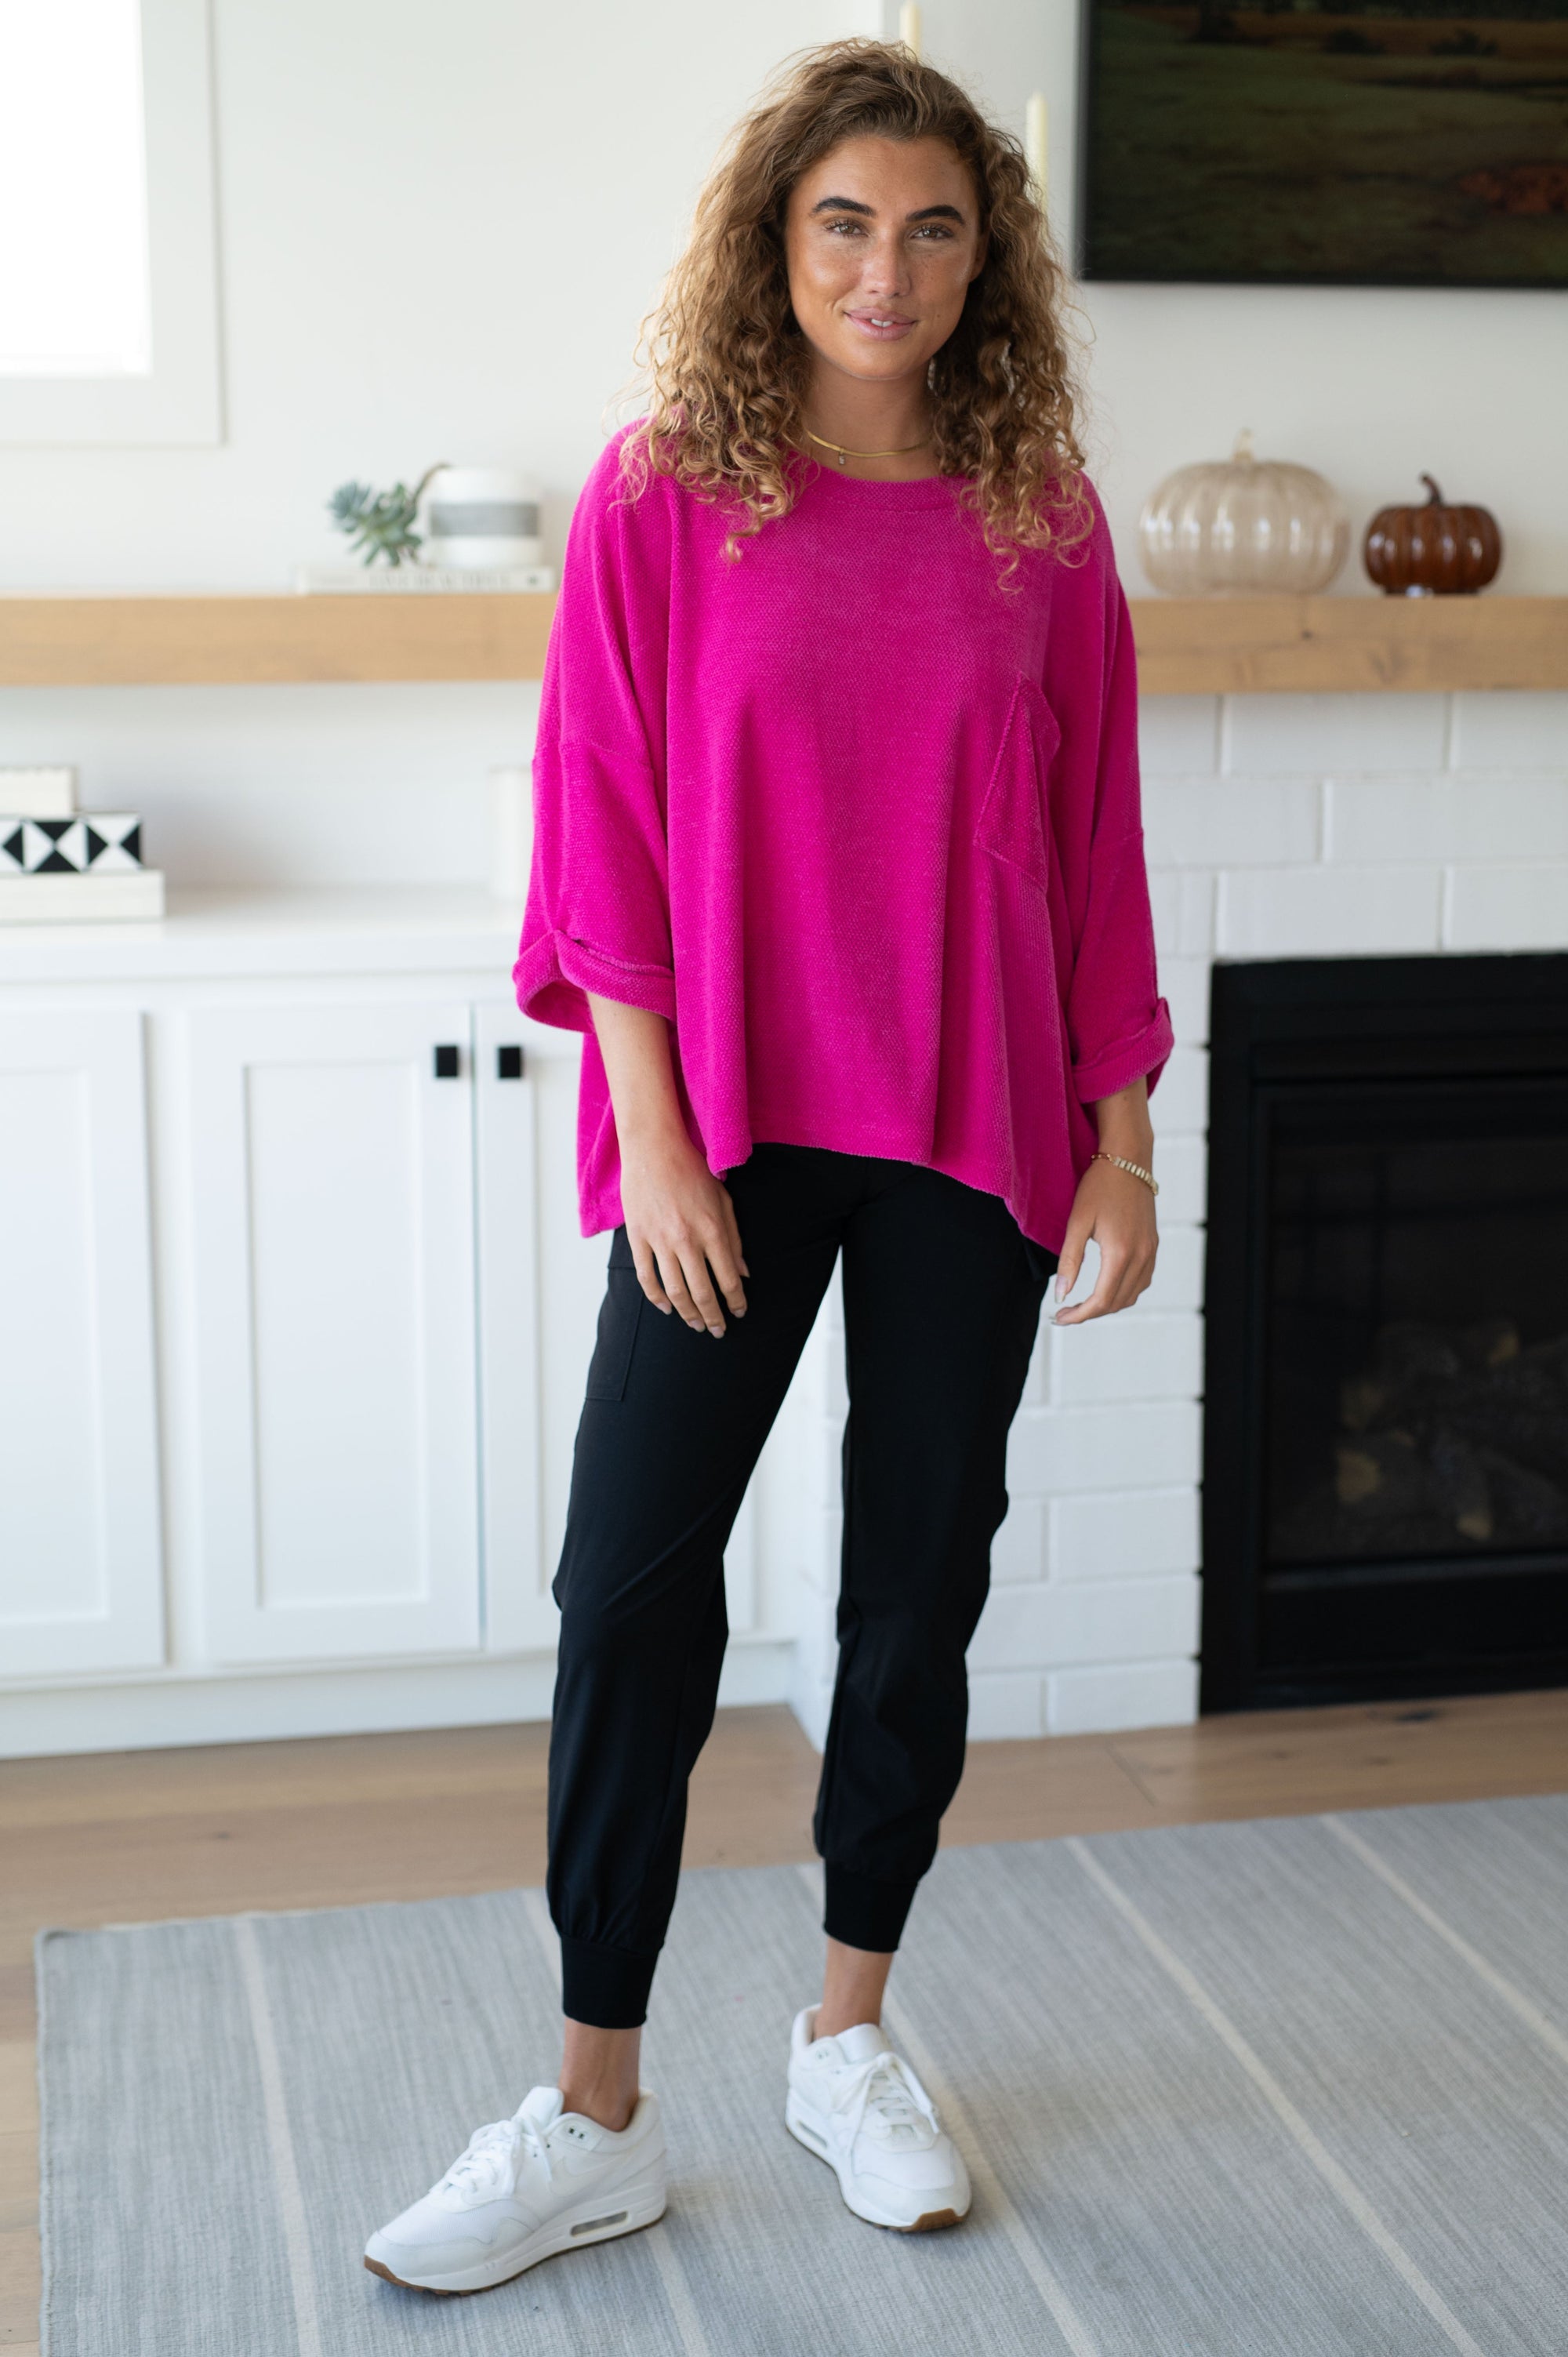 Pink Thoughts Chenille Blouse-Womens-mercuryfoodservice Shop for Women & Kids